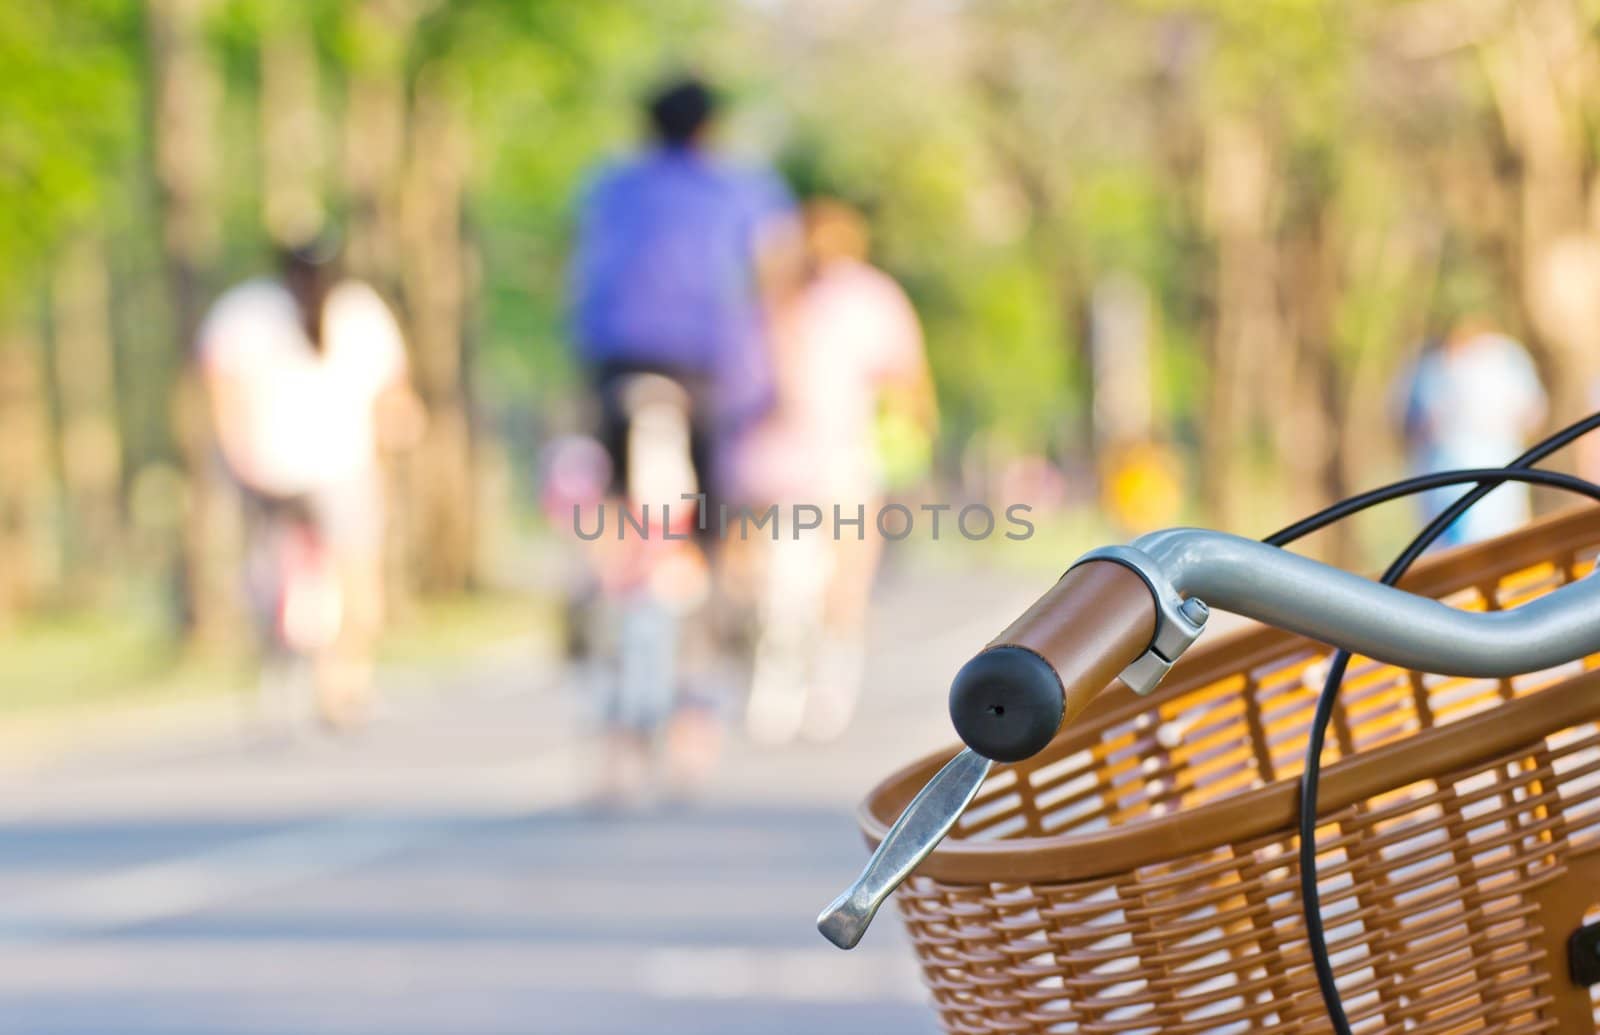 Bicycle in the park by Myimagine